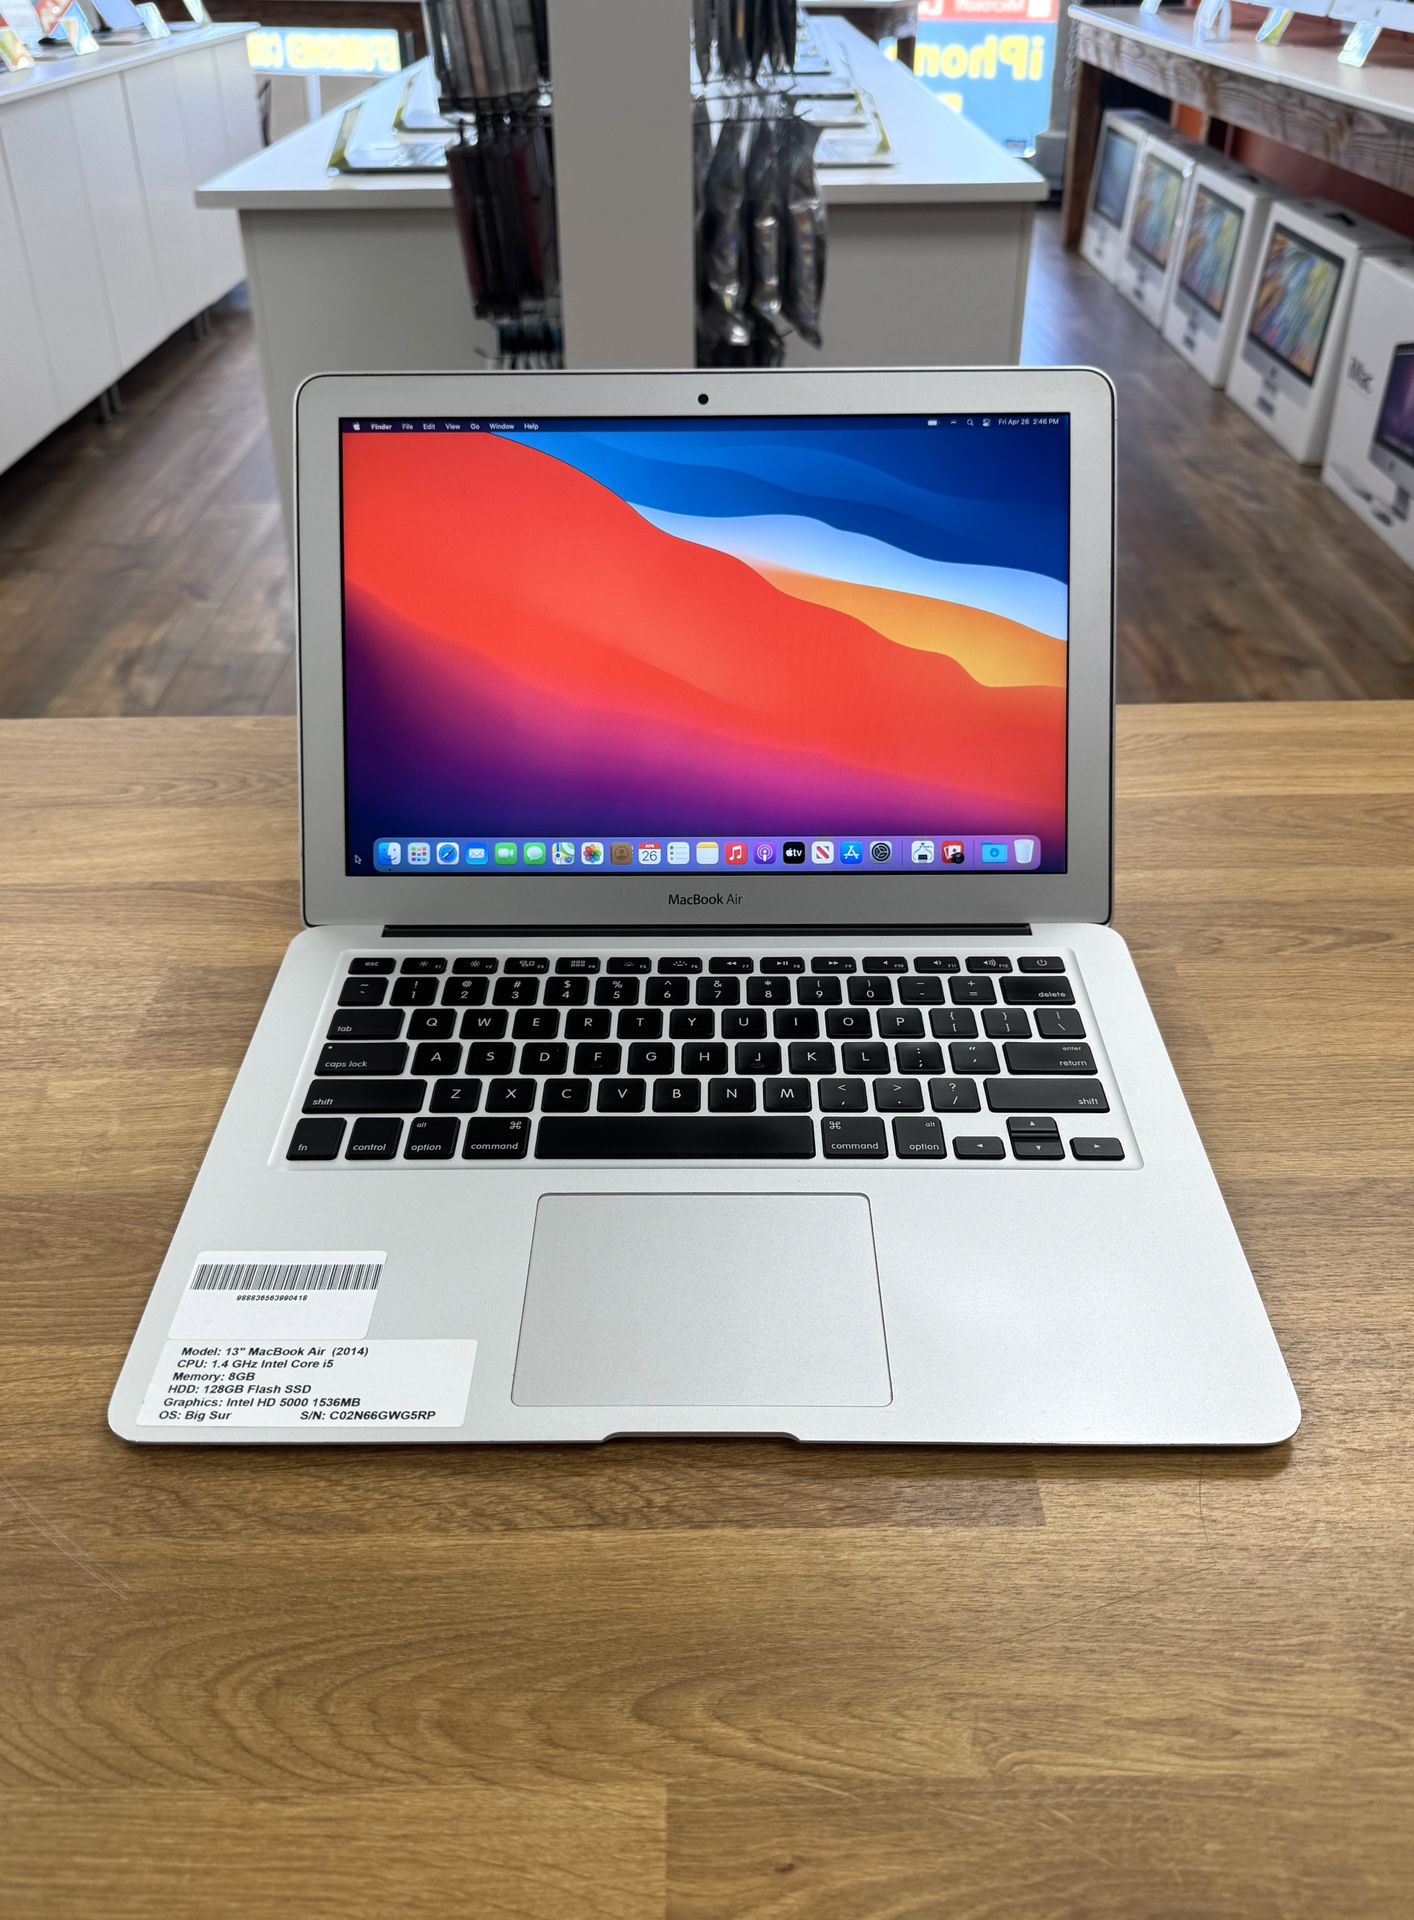 13" MacBook Air * 1.4Ghz Intel Core i5 * 128GB SSD * 8GB RAM * Excellent Condition 